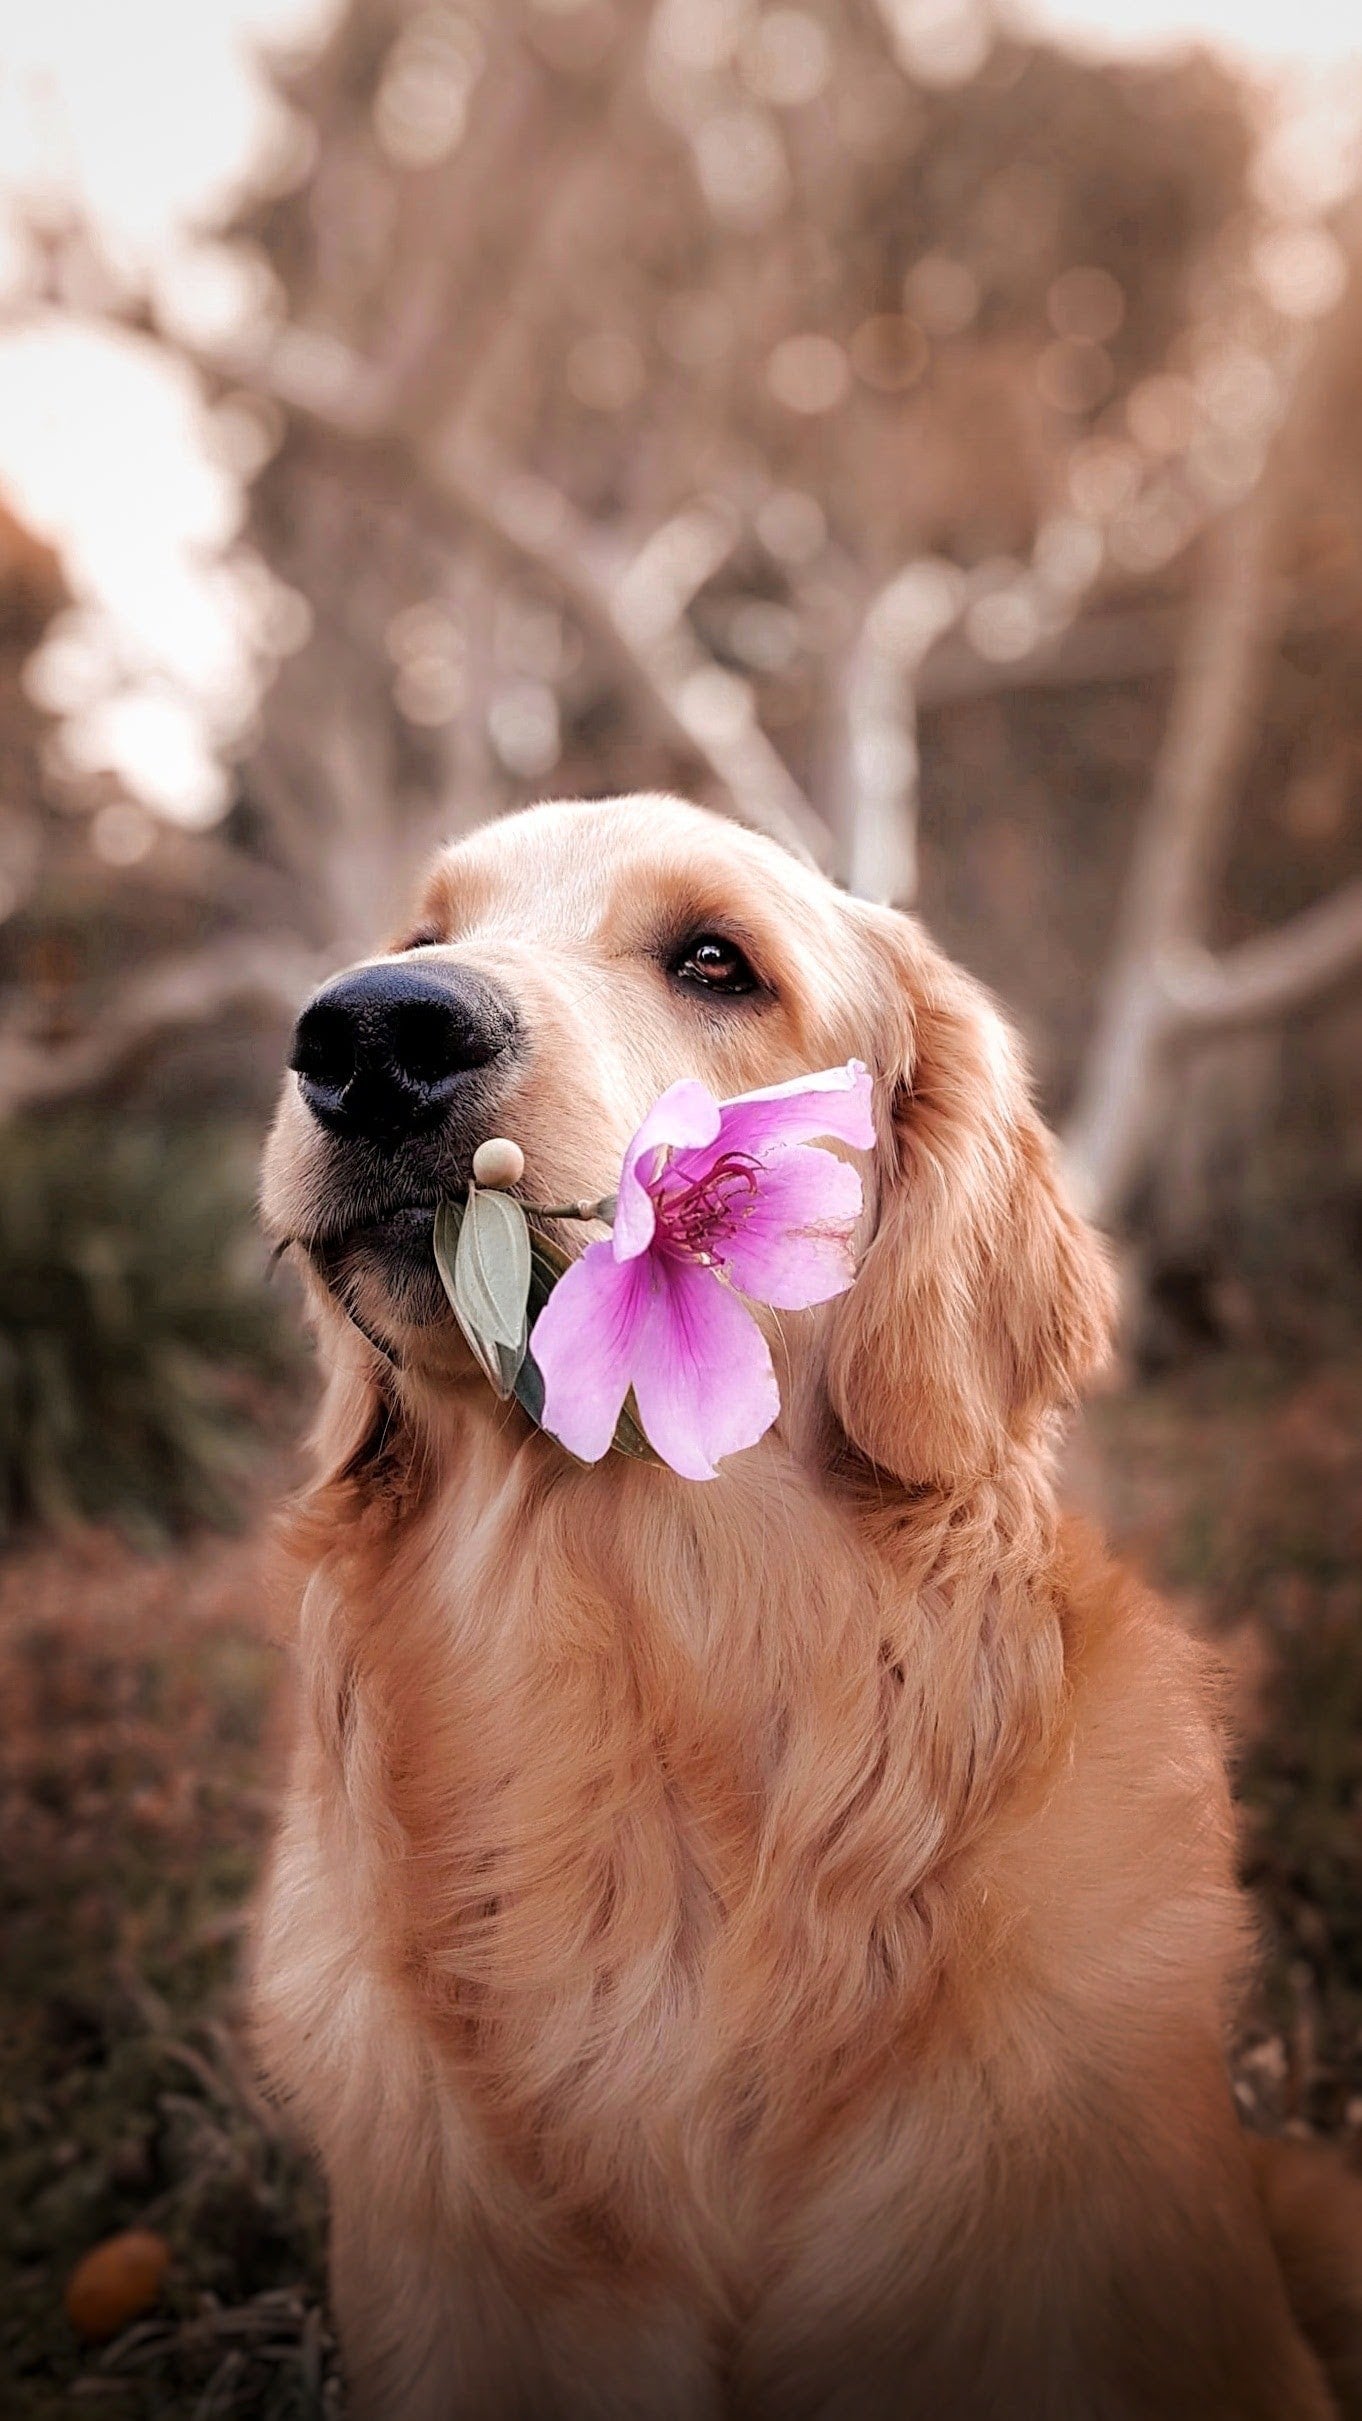 How You Can Use Natural Flower Essences for Your Pet’s Behavior Issues